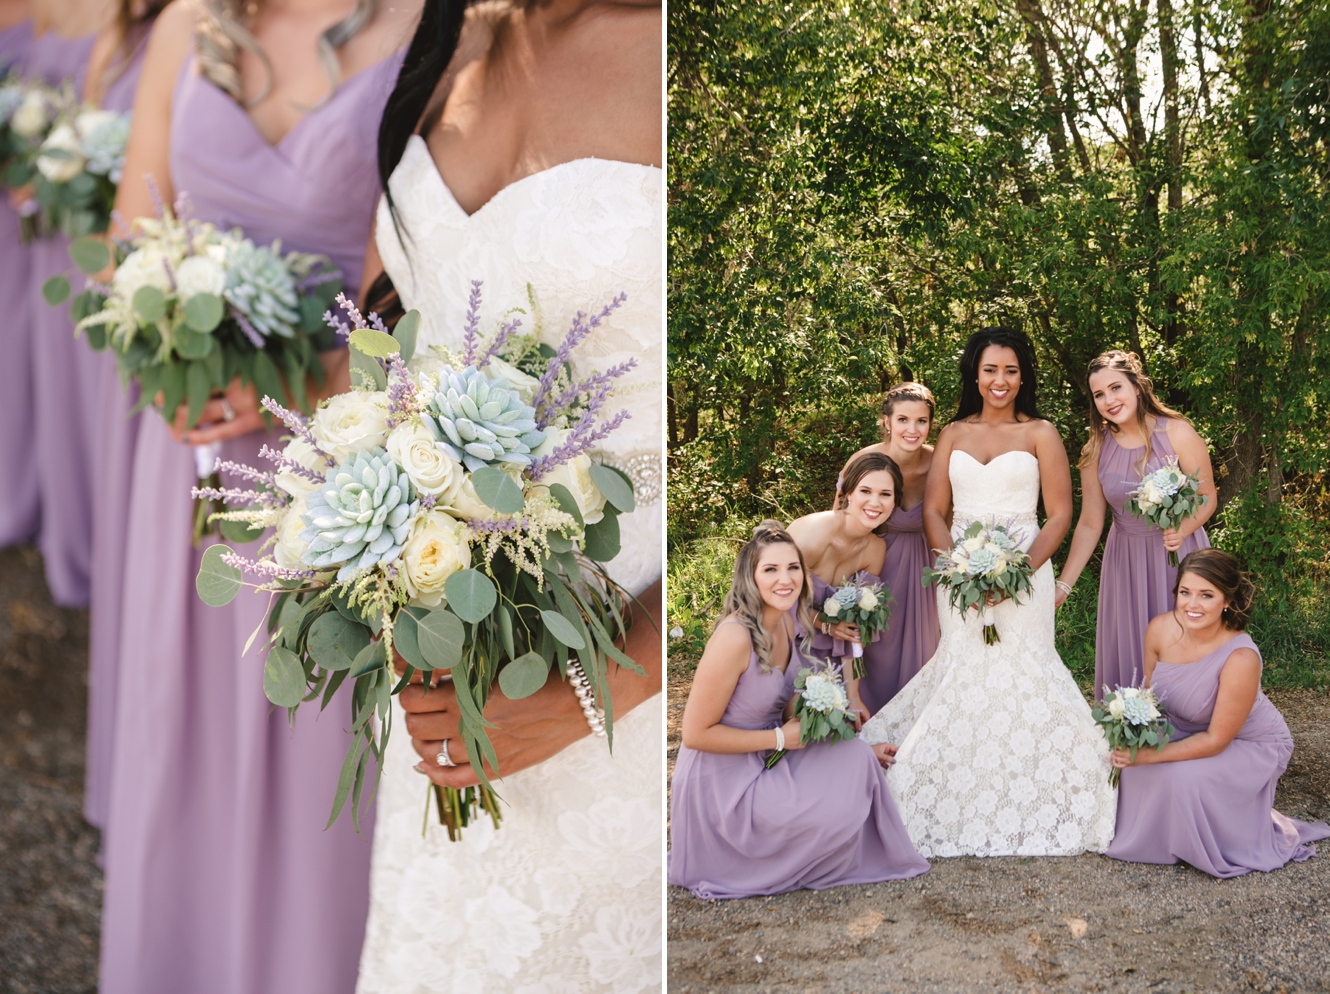 Dusty lavender bridesmaid gown photo